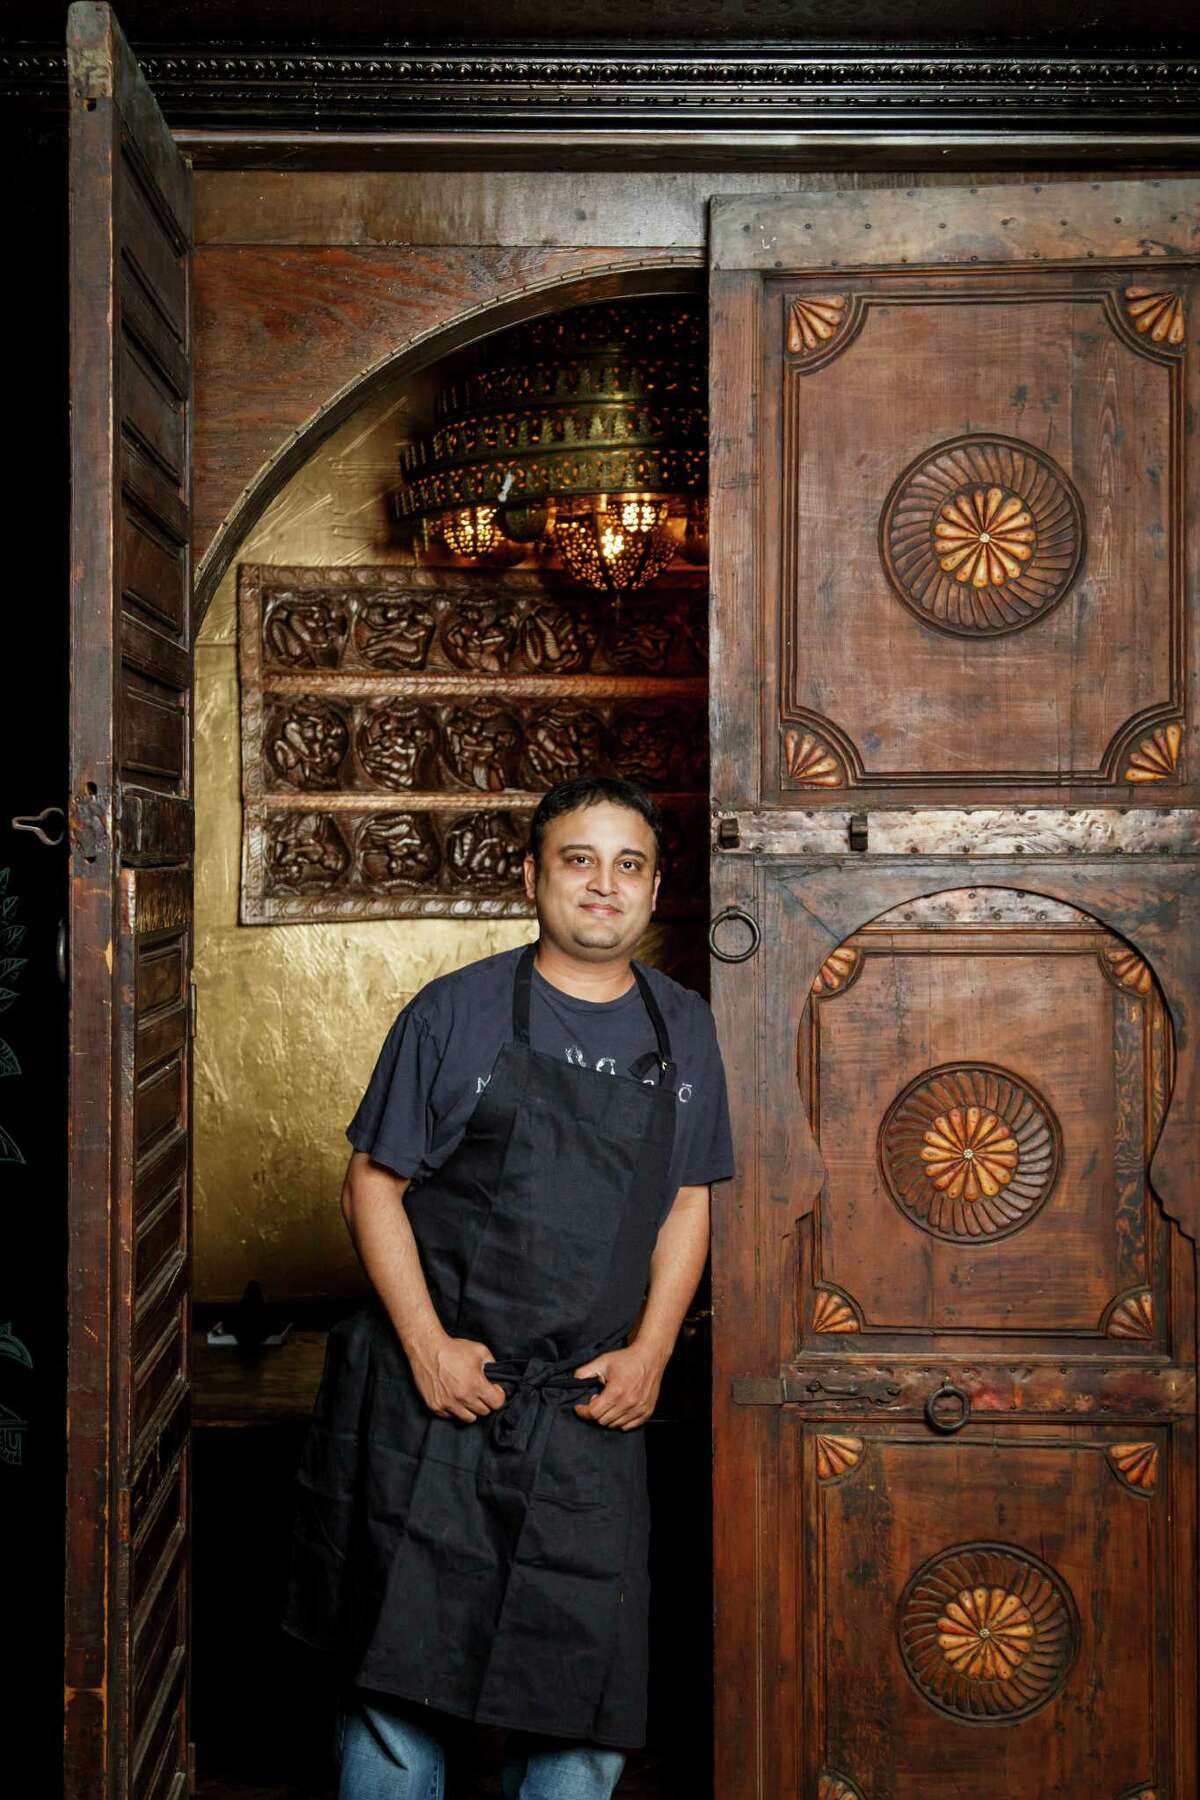 Chef and owner Rikesh Patel at his restaurant Ambrosia which features an Asian fusion cuisines merging Japanese, Thai, Vietnamese and Chinese flavors, Thursday, May 23, 2013, in Houston. ( Michael Paulsen / Houston Chronicle )